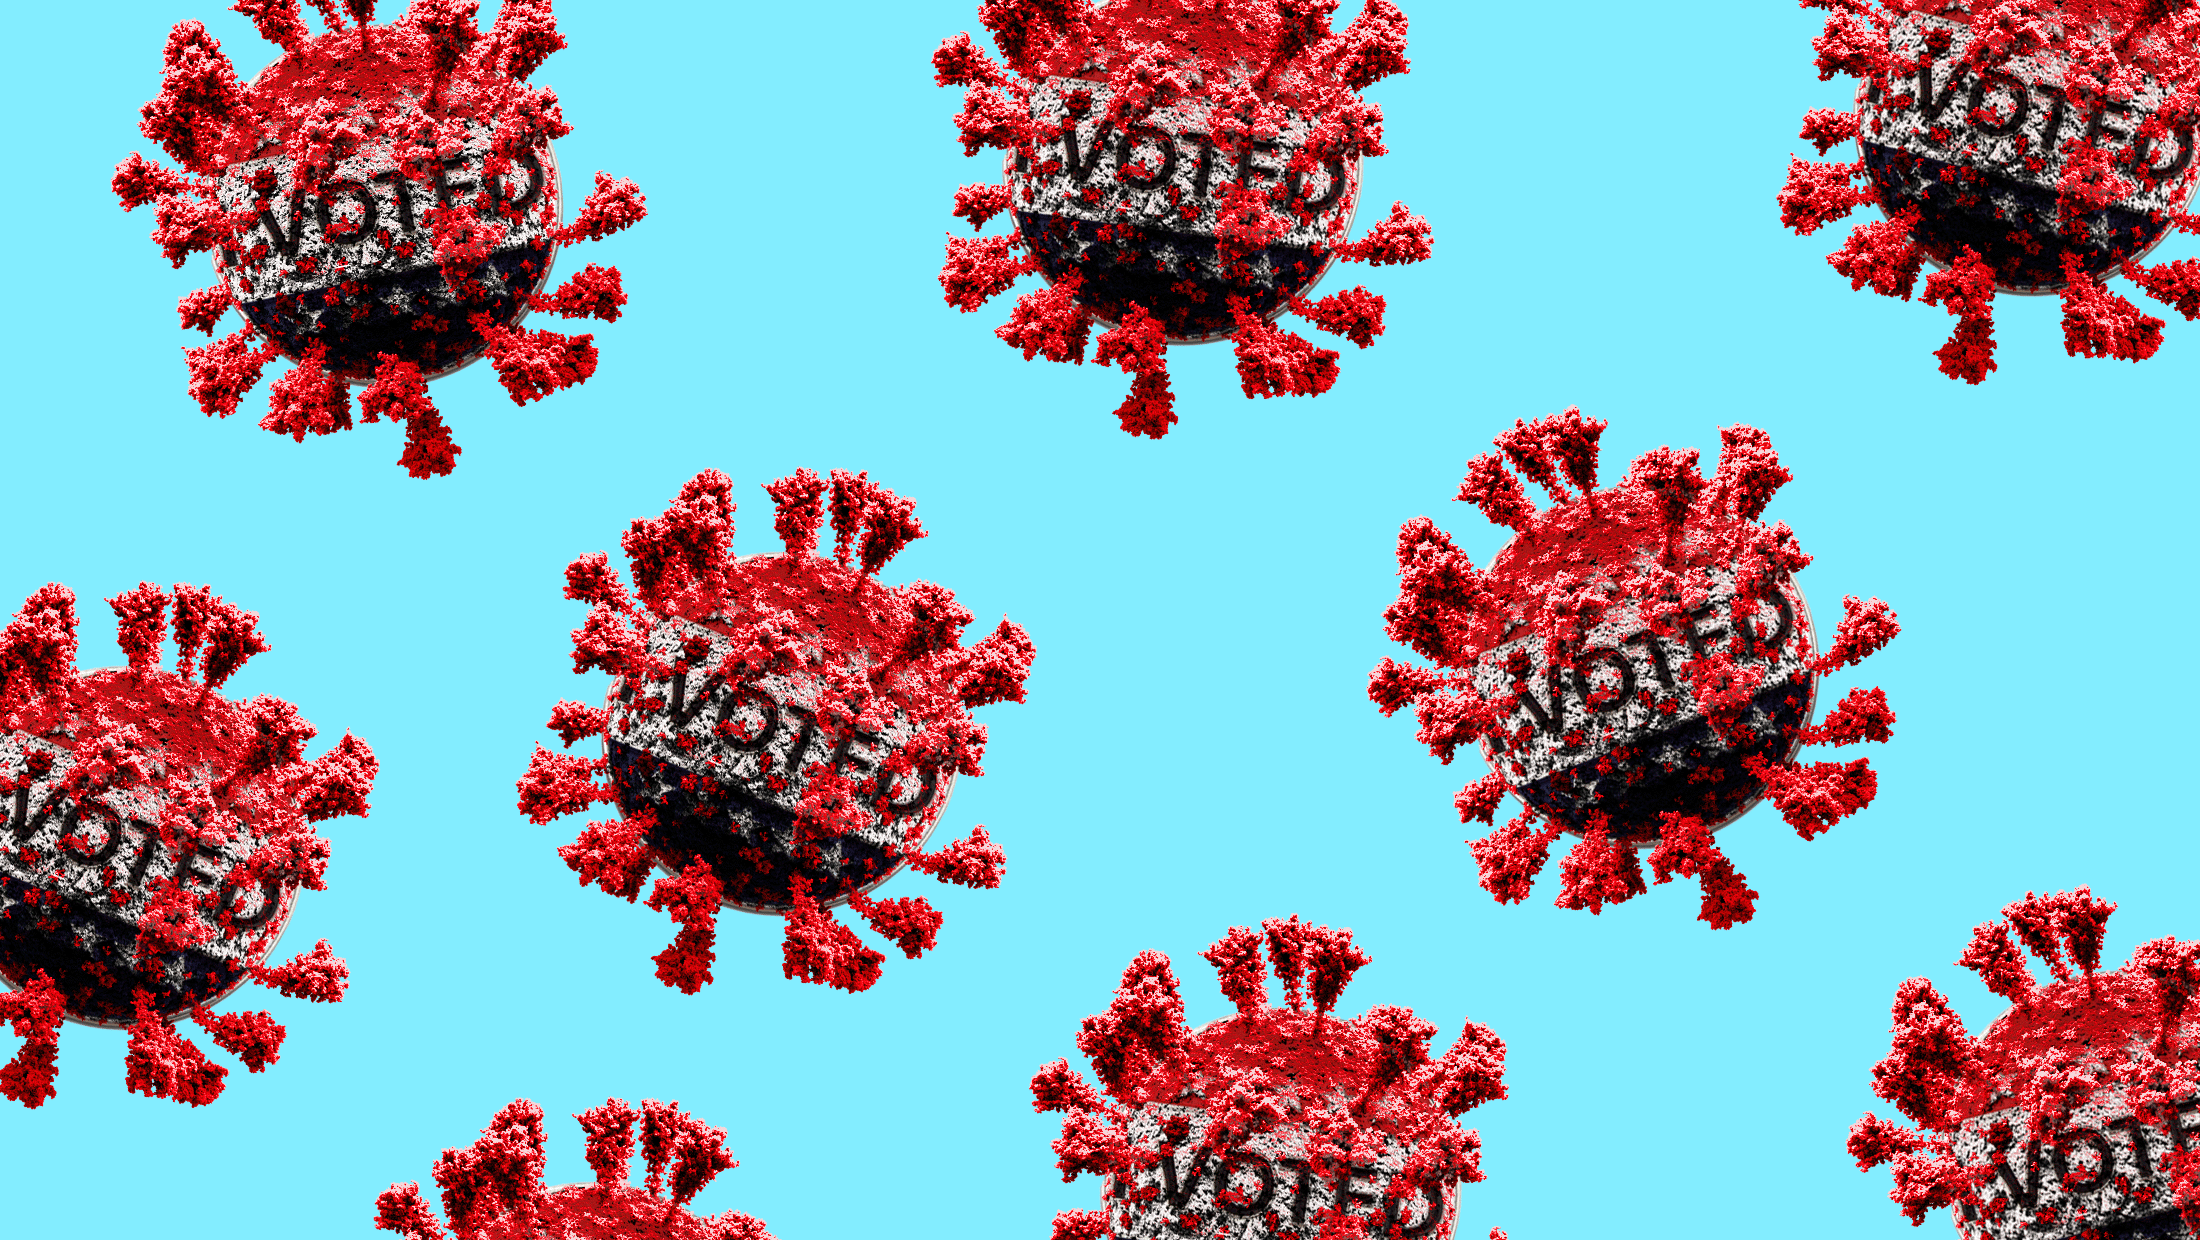 Blue background with red-toned viruses that say "VOTED" on them taking up the graphic.